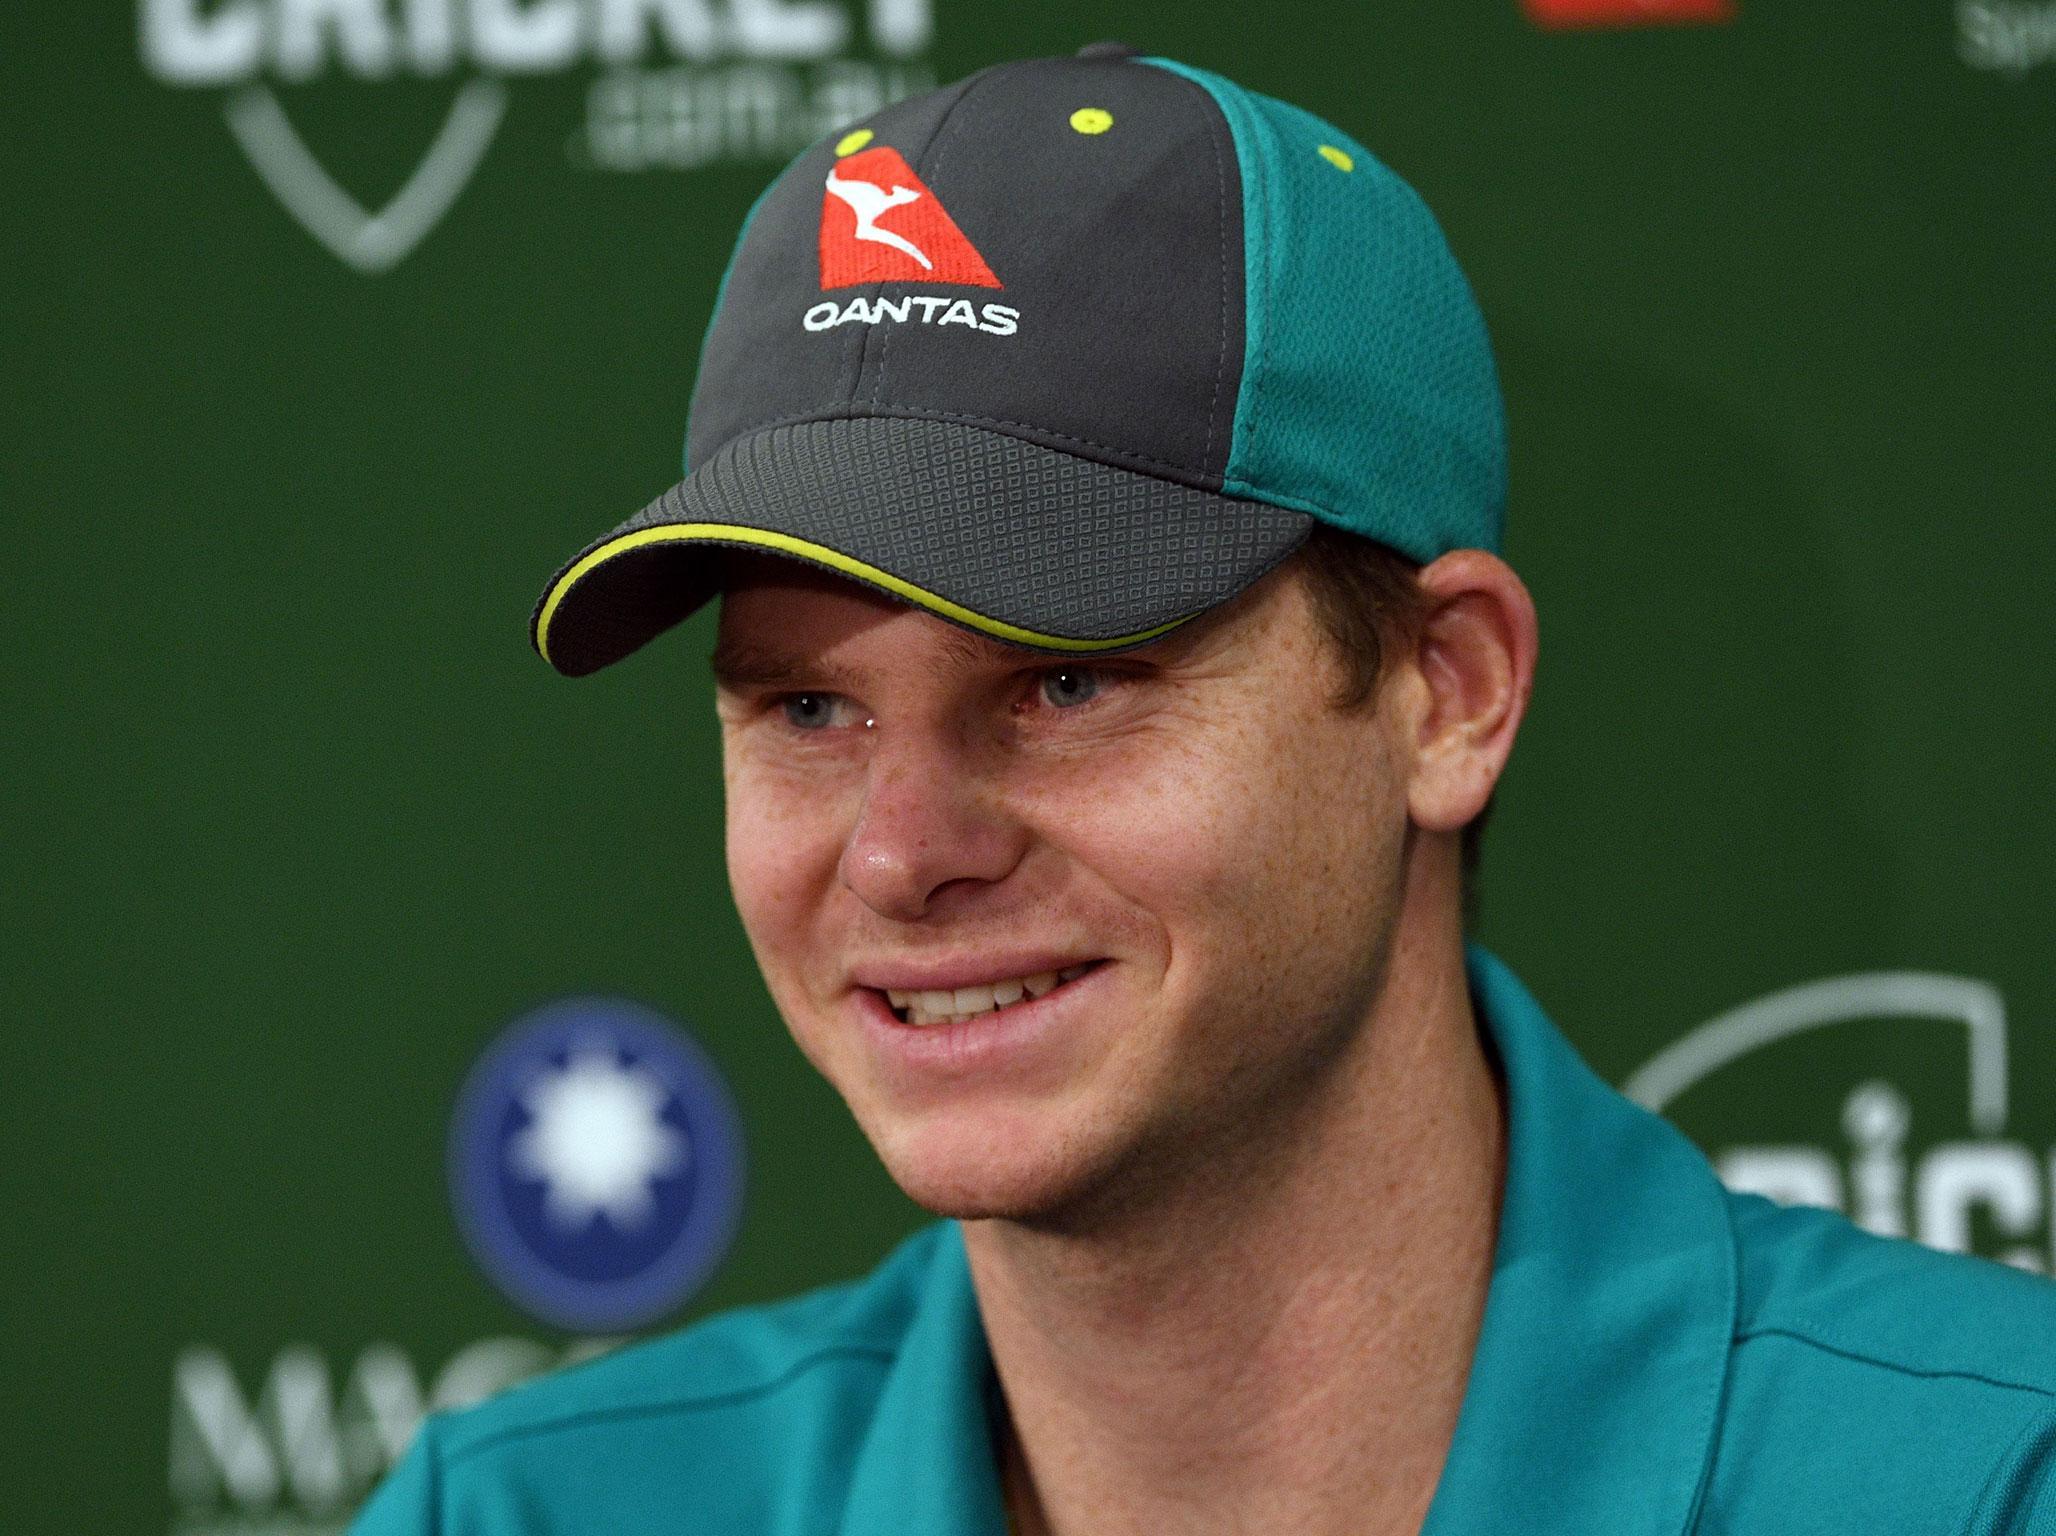 Steve Smith wants to give county cricket a go before he hangs up his batting gloves